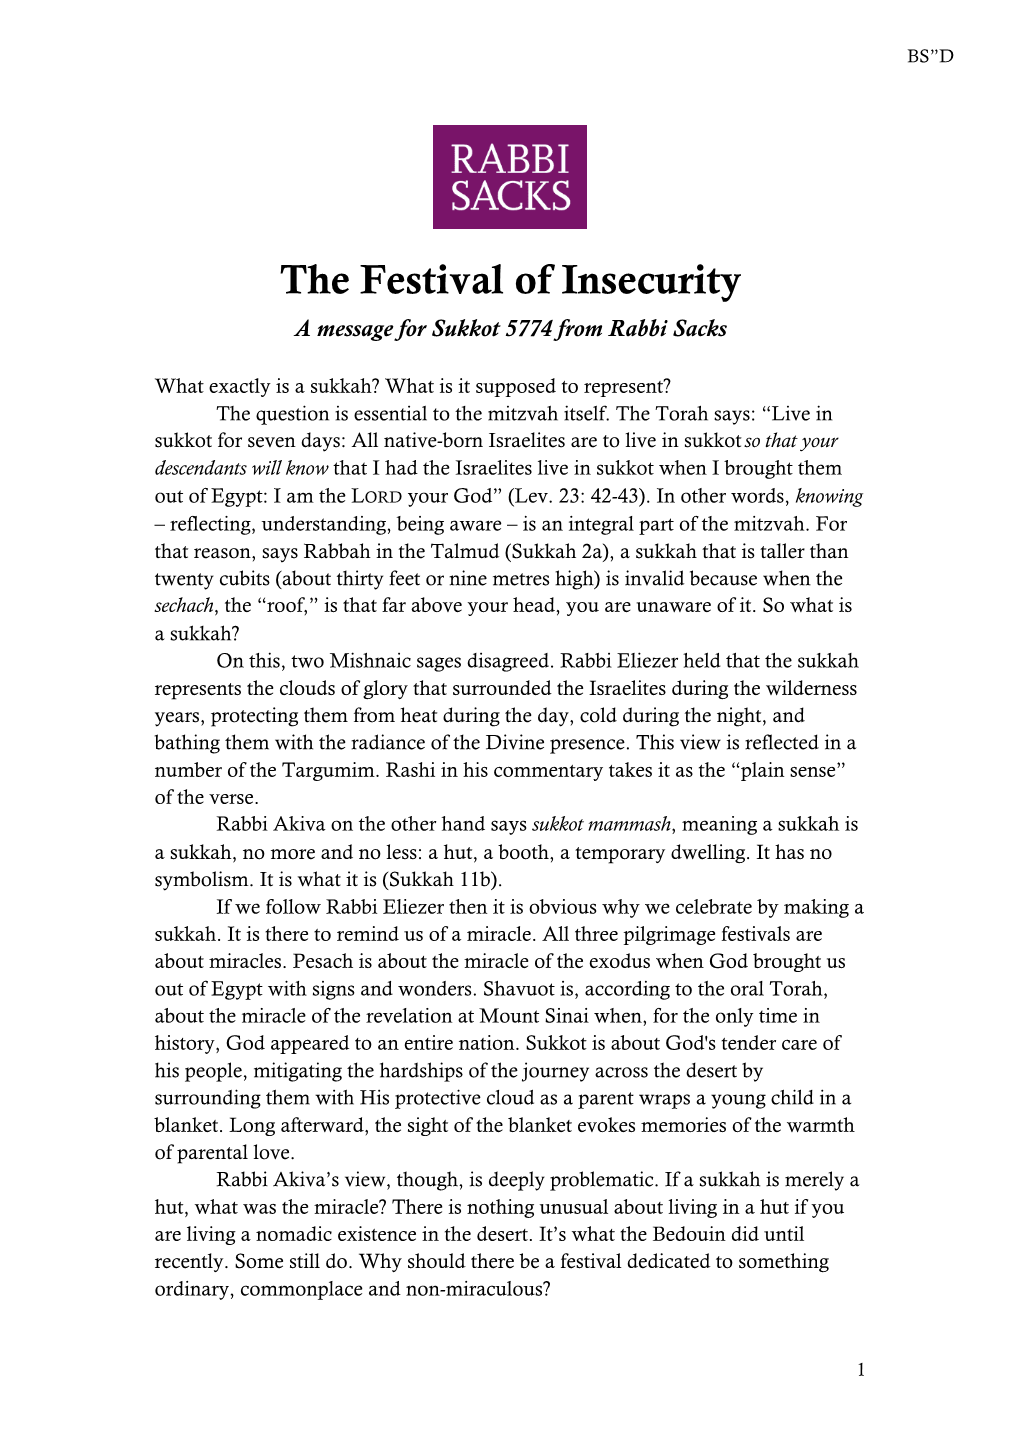 The Festival of Insecurity a Message for Sukkot 5774 from Rabbi Sacks